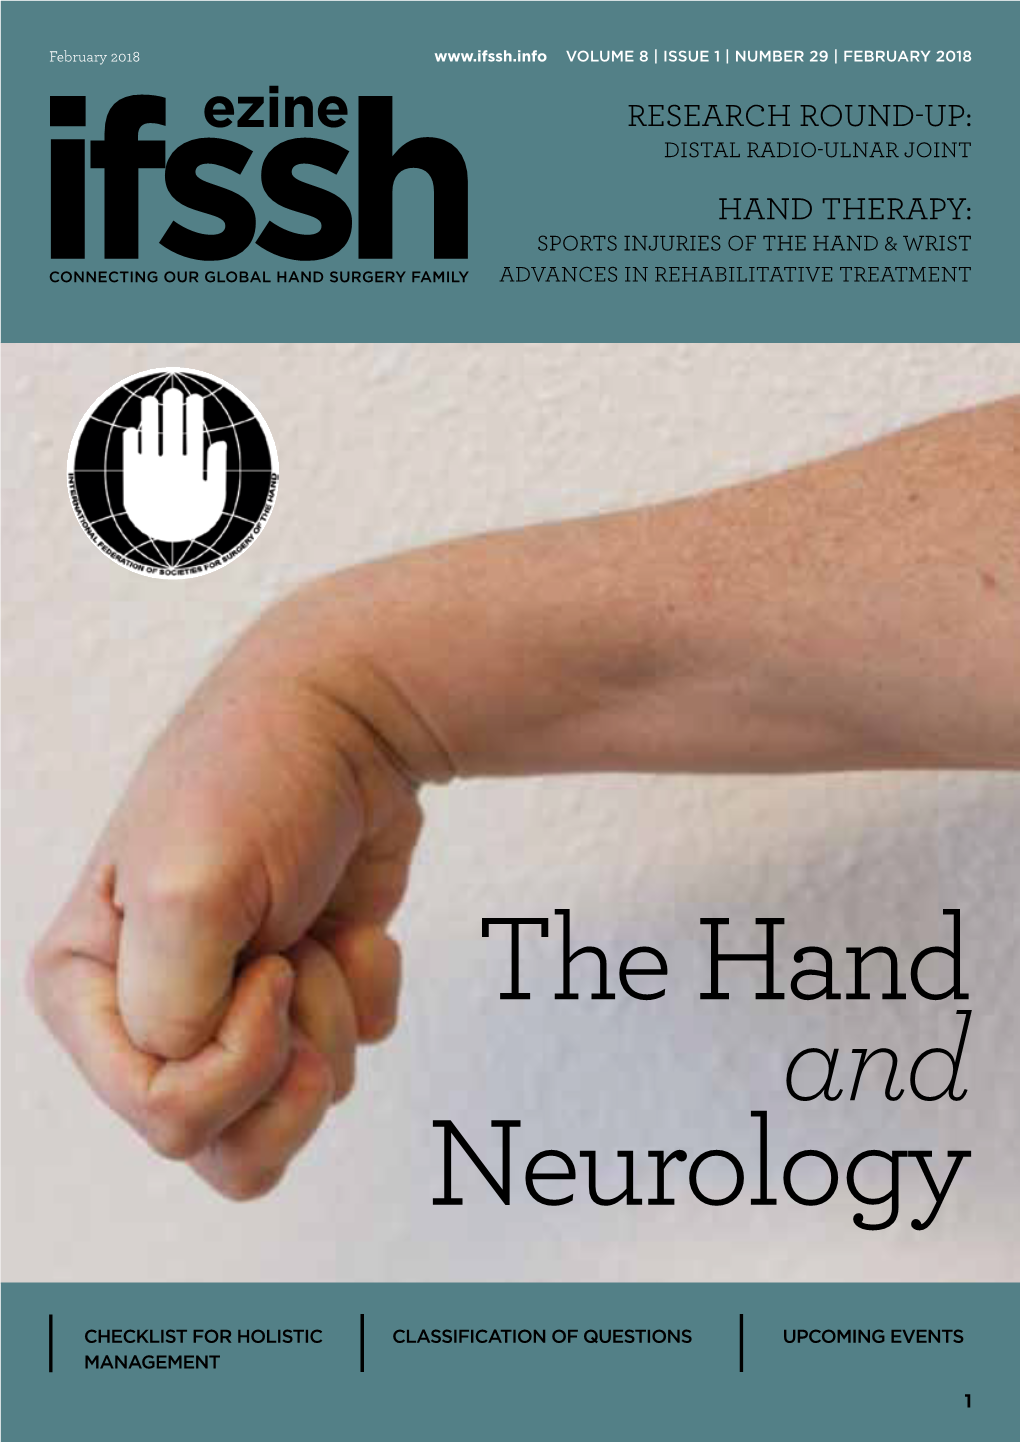 HAND THERAPY: SPORTS INJURIES of the HAND & WRIST Ifsshconnecting OUR GLOBAL HAND SURGERY FAMILY ADVANCES in REHABILITATIVE TREATMENT